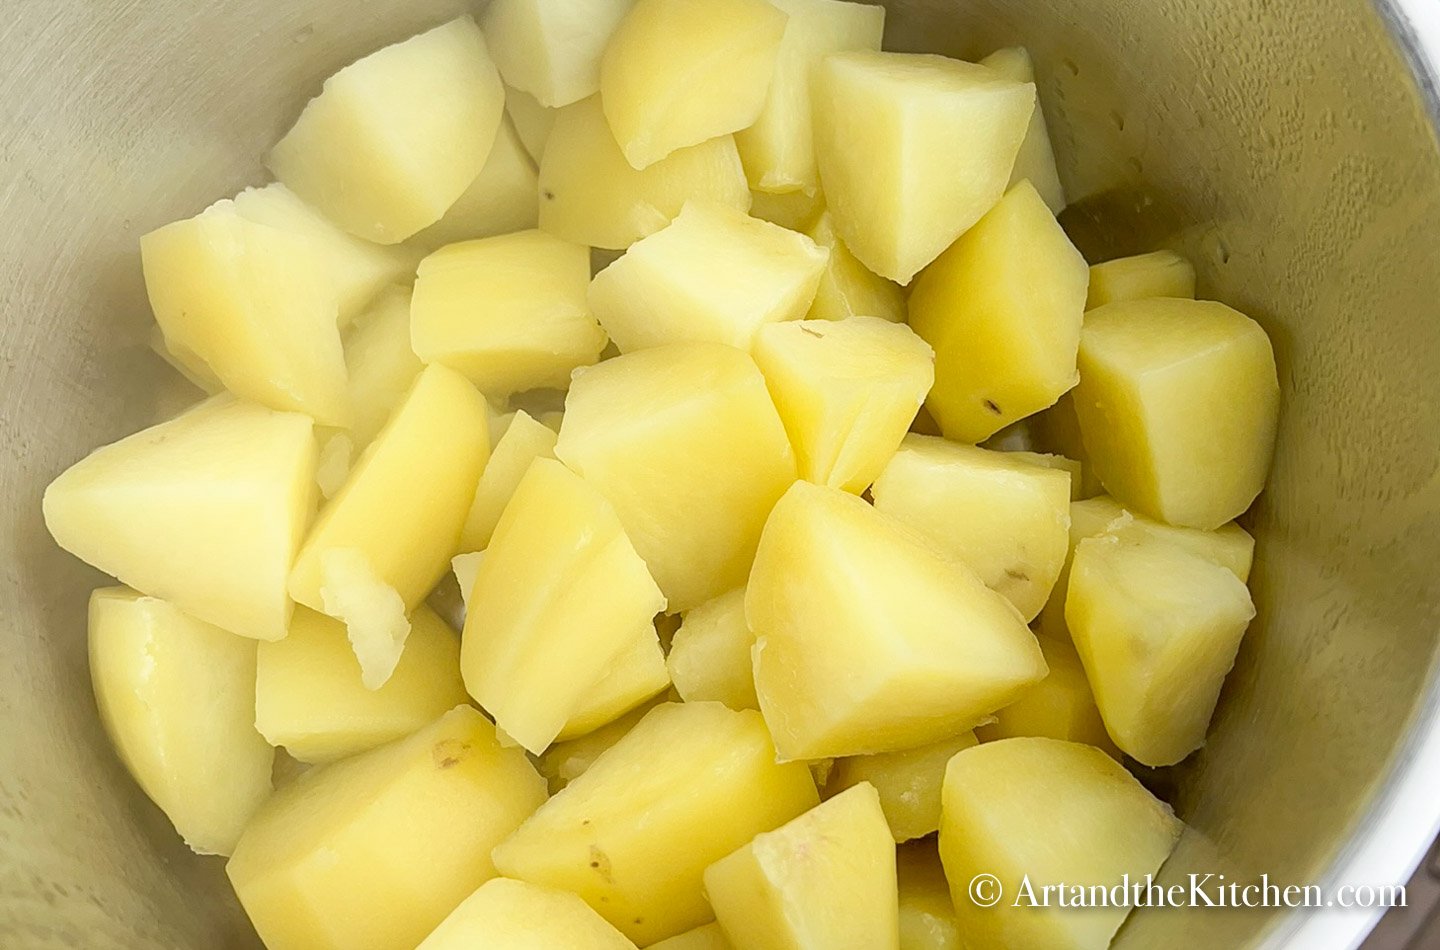 Stainless steel pot of cooked cubed potatoes.